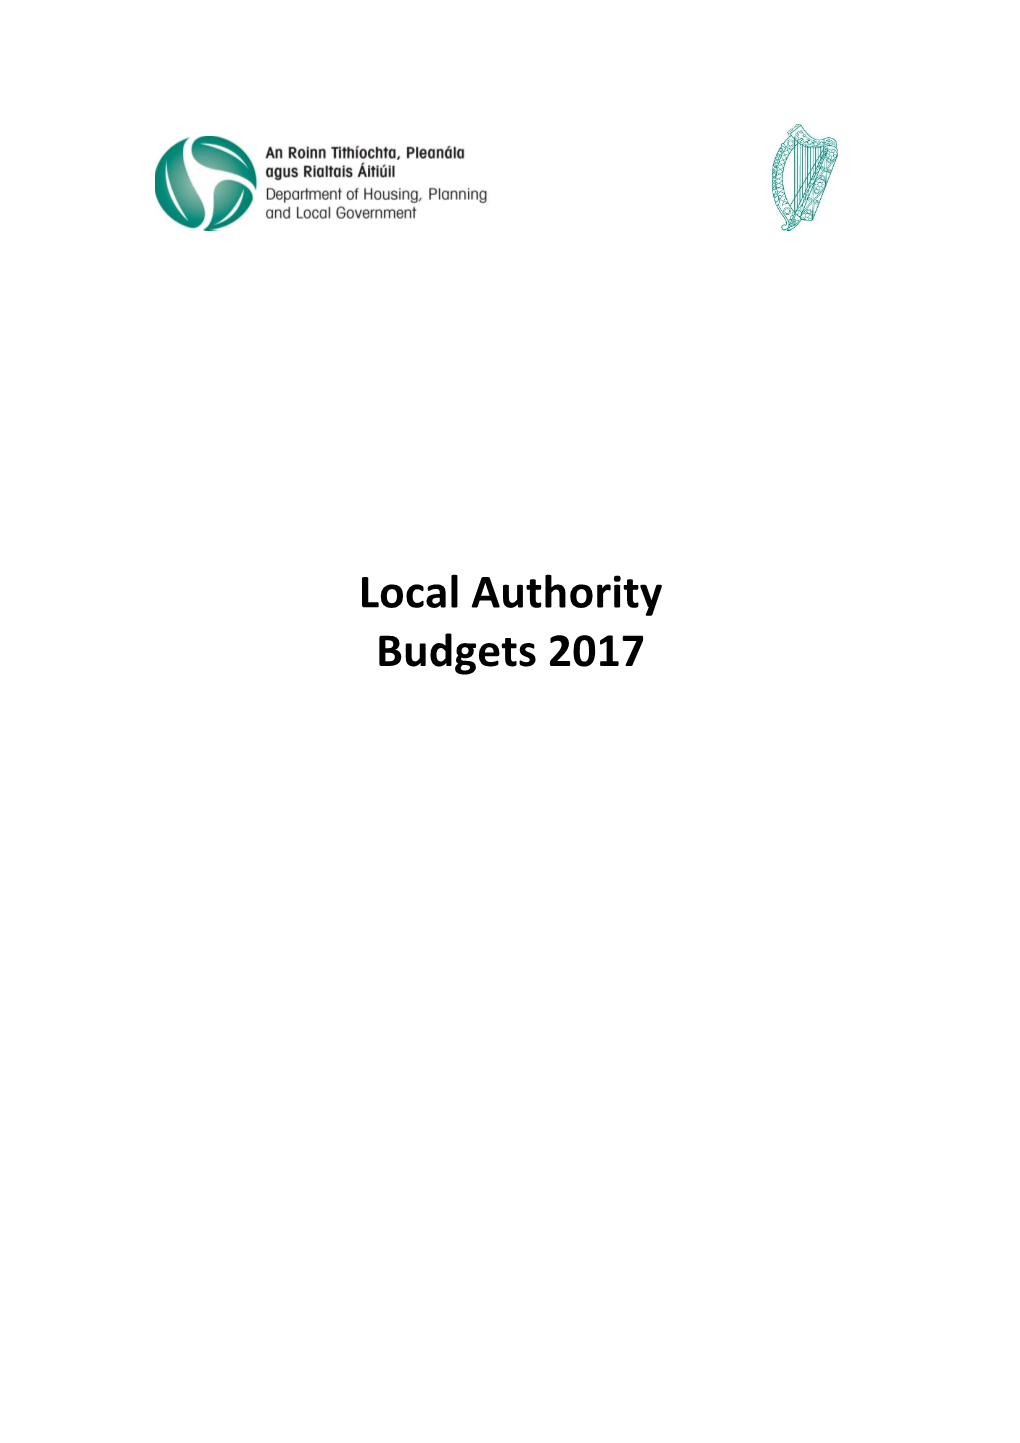 Local Authority Budgets 2017